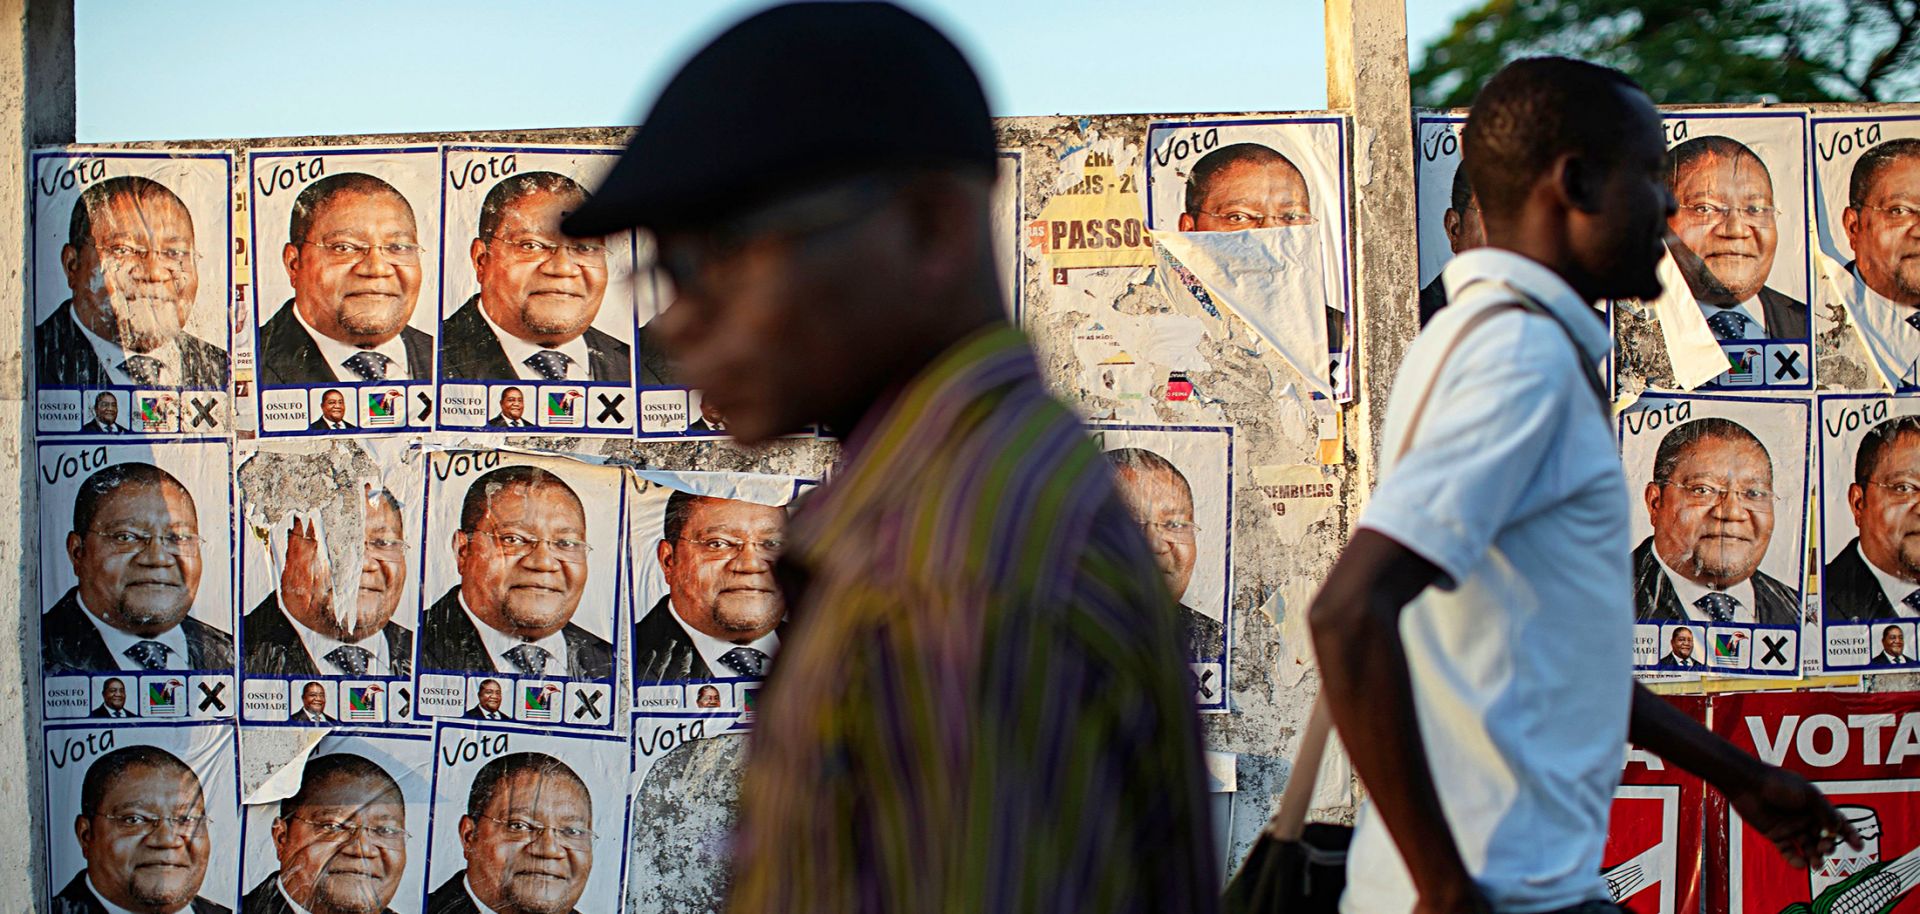 Posters for Renamo's presidential candidate, Ossufo Momade, line a wall ahead of Mozambique's Oct. 15 polls. 